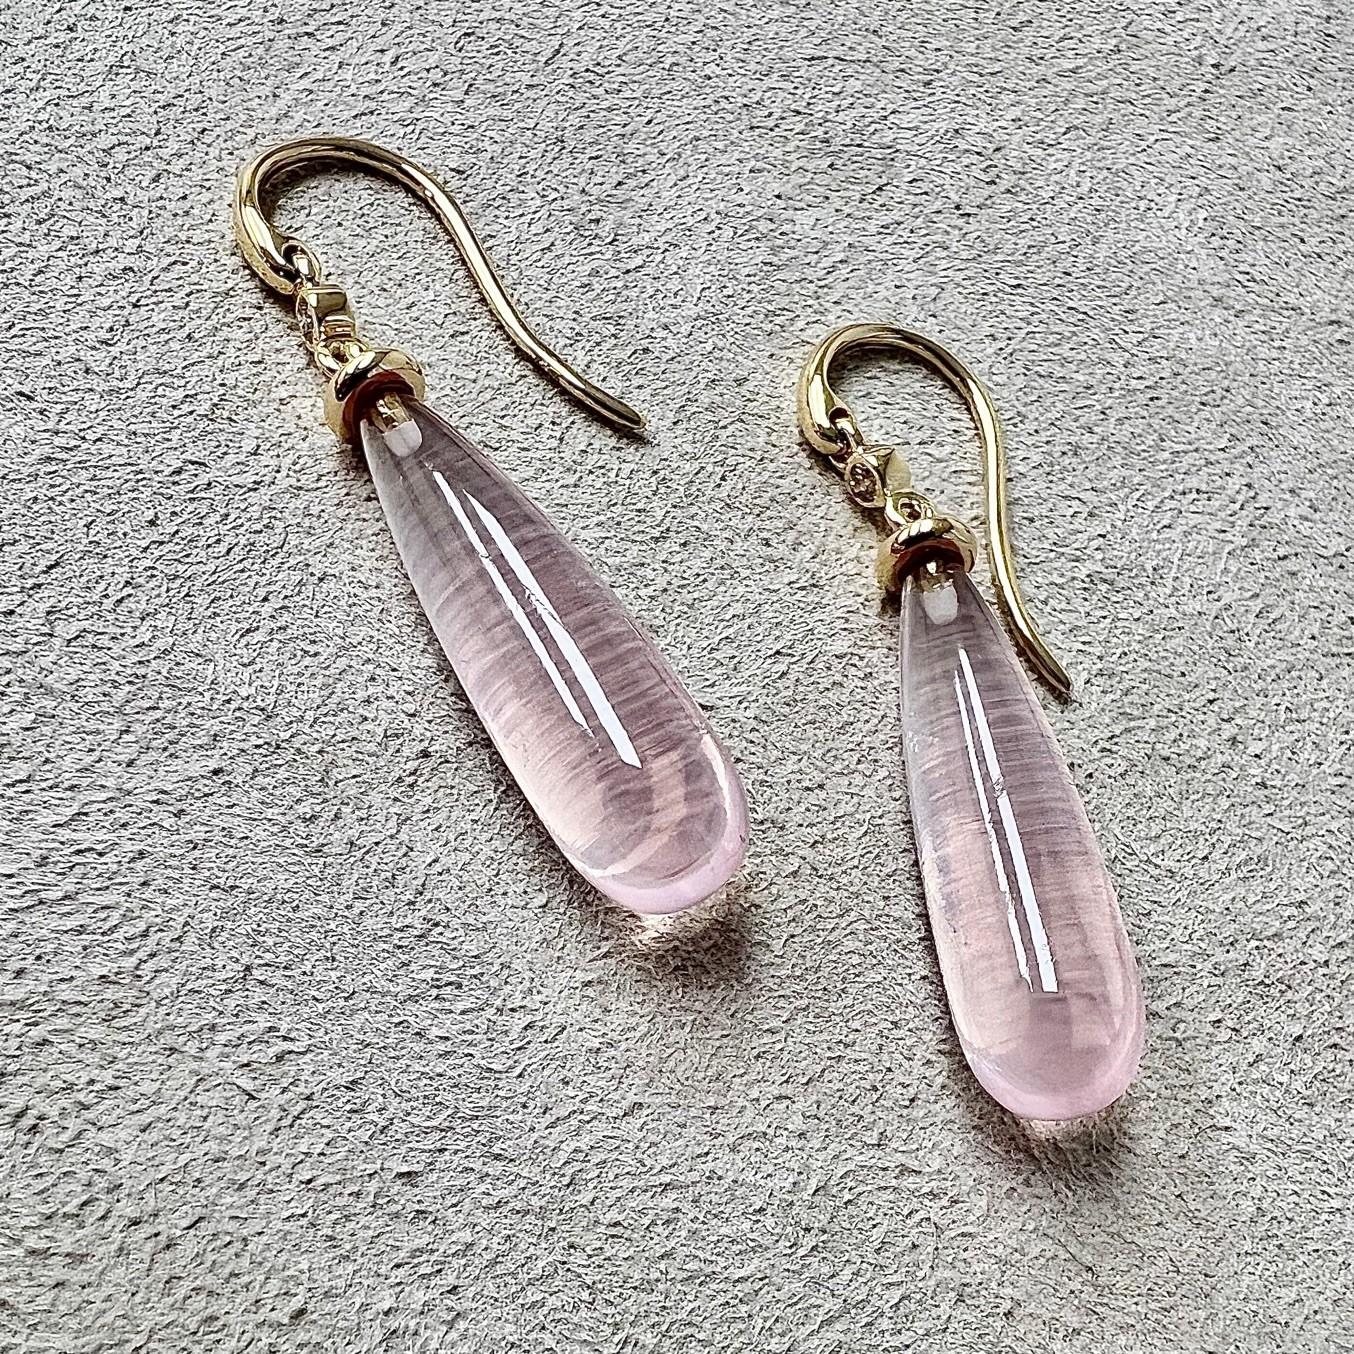 Created in 18 karat yellow gold
Rose quartz drops 17 carats approx.
Bright champagne diamonds 0.05 carat approx.
French wire for pierced ears
Limited edition

Forged from 18 karat yellow gold, these limited-edition earrings boast a magnificent